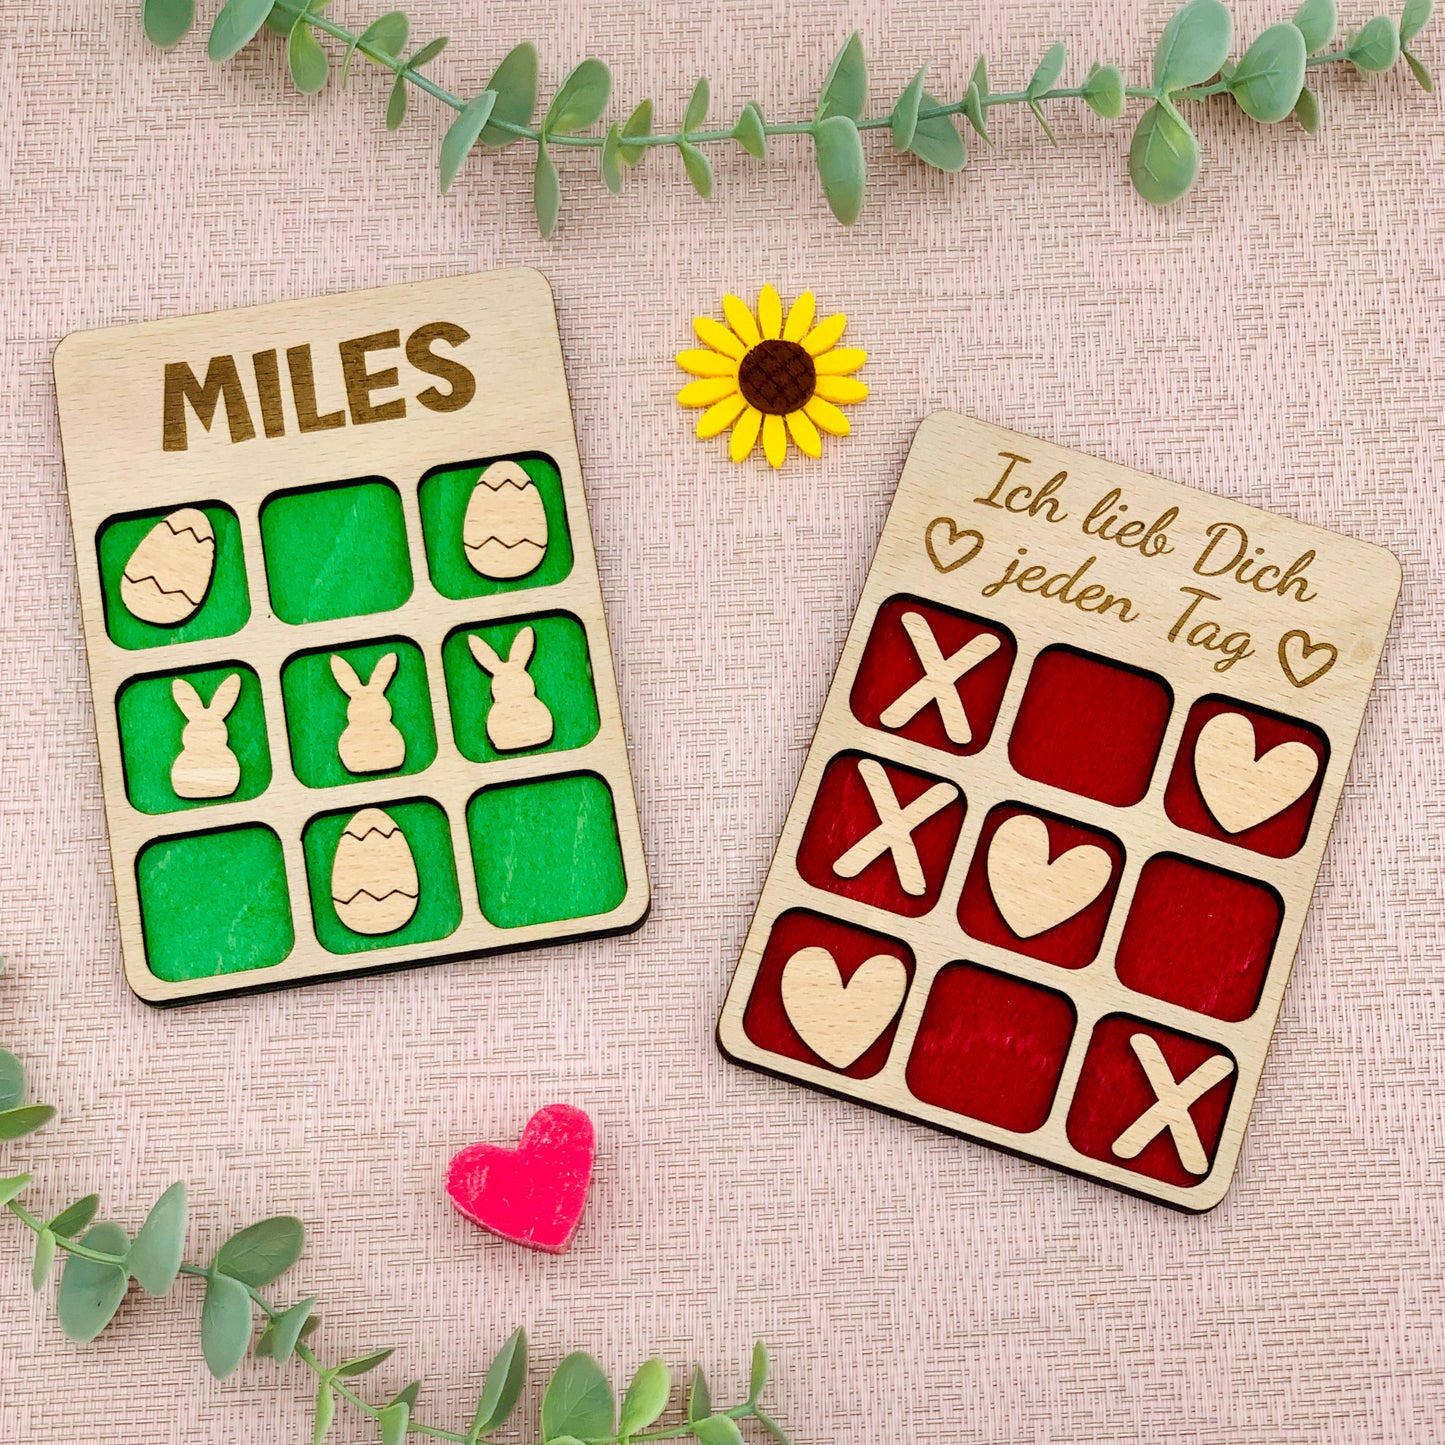 Easter gift - Match 3 wooden - Tic Tac Toe wooden board game - small board game personalized - travel game -OXO game - children's gift